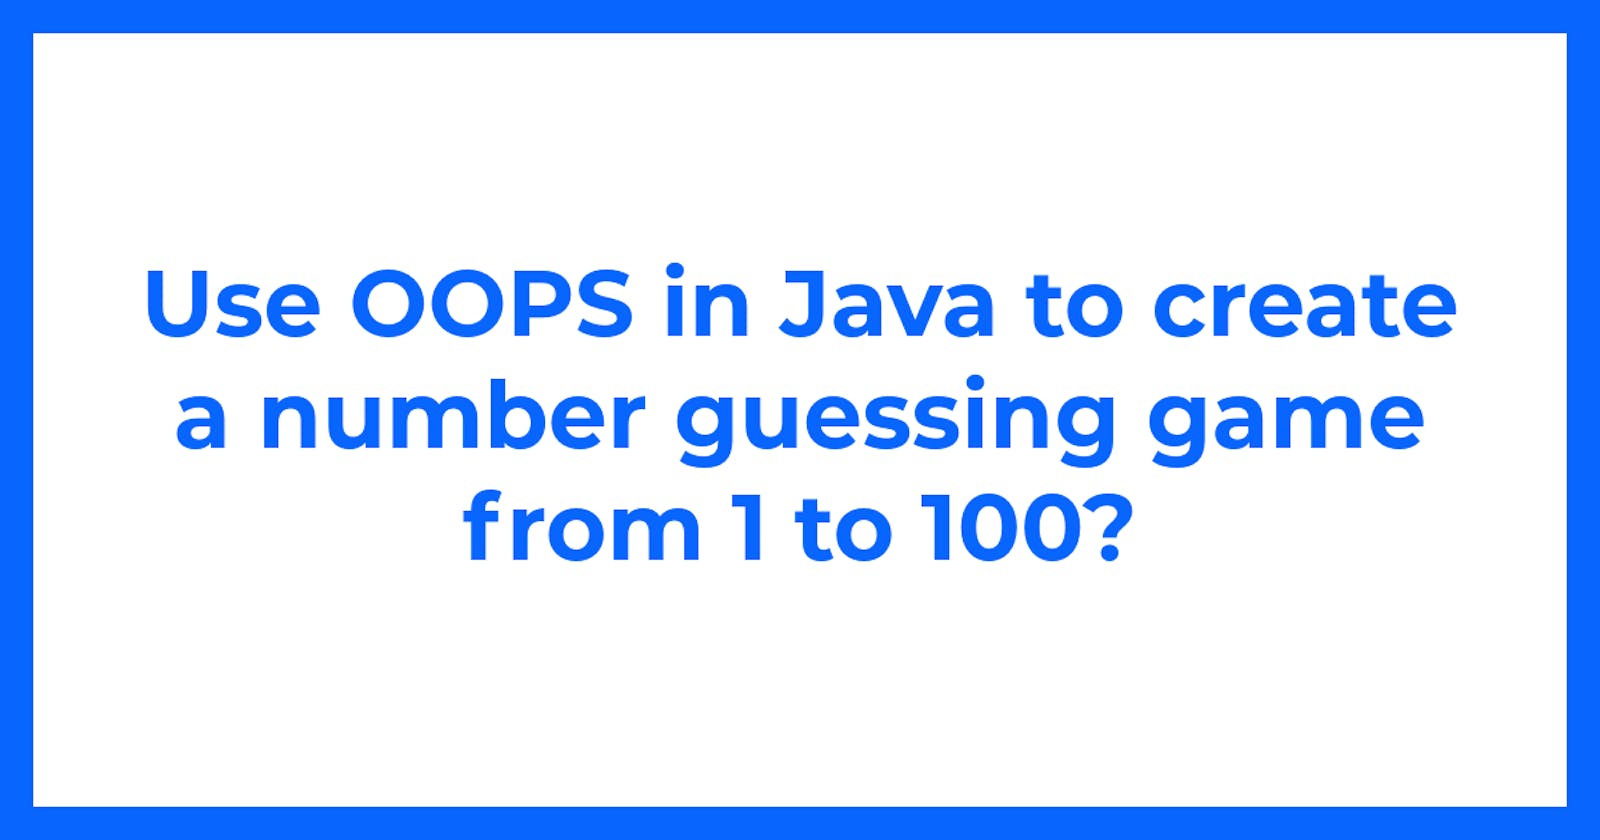 Use OOPS in Java to create a number guessing game from 1 to 100?